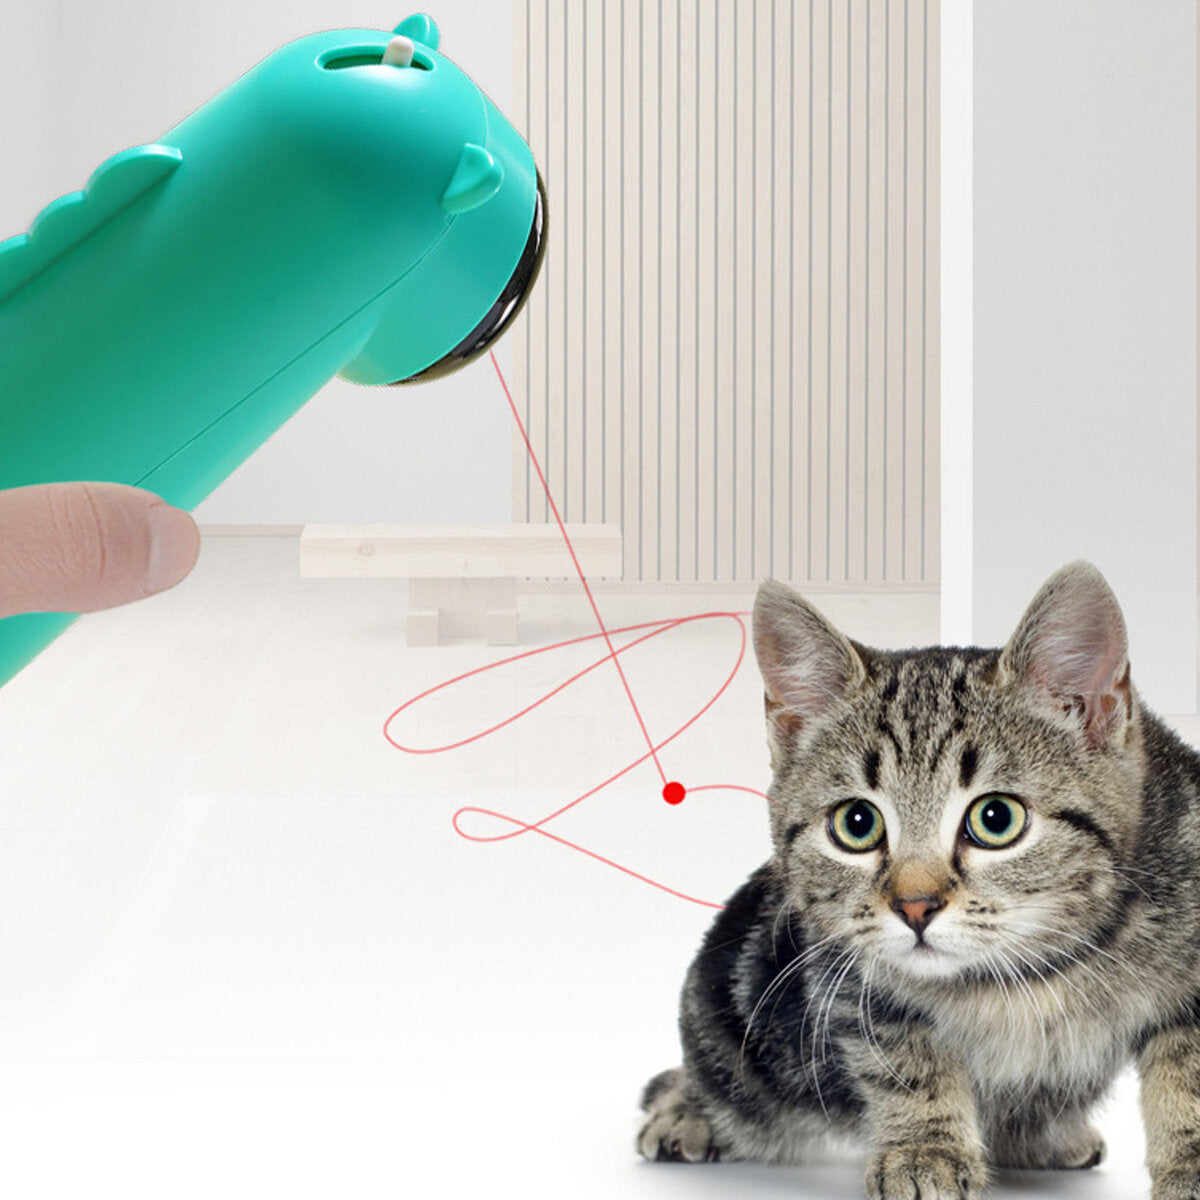 USB Automatic Cat Toys Teaser Interactive Smart Teasing Pet 5 Angles 2-Gears LED Laser Funny Handheld Mode Electronic Pet